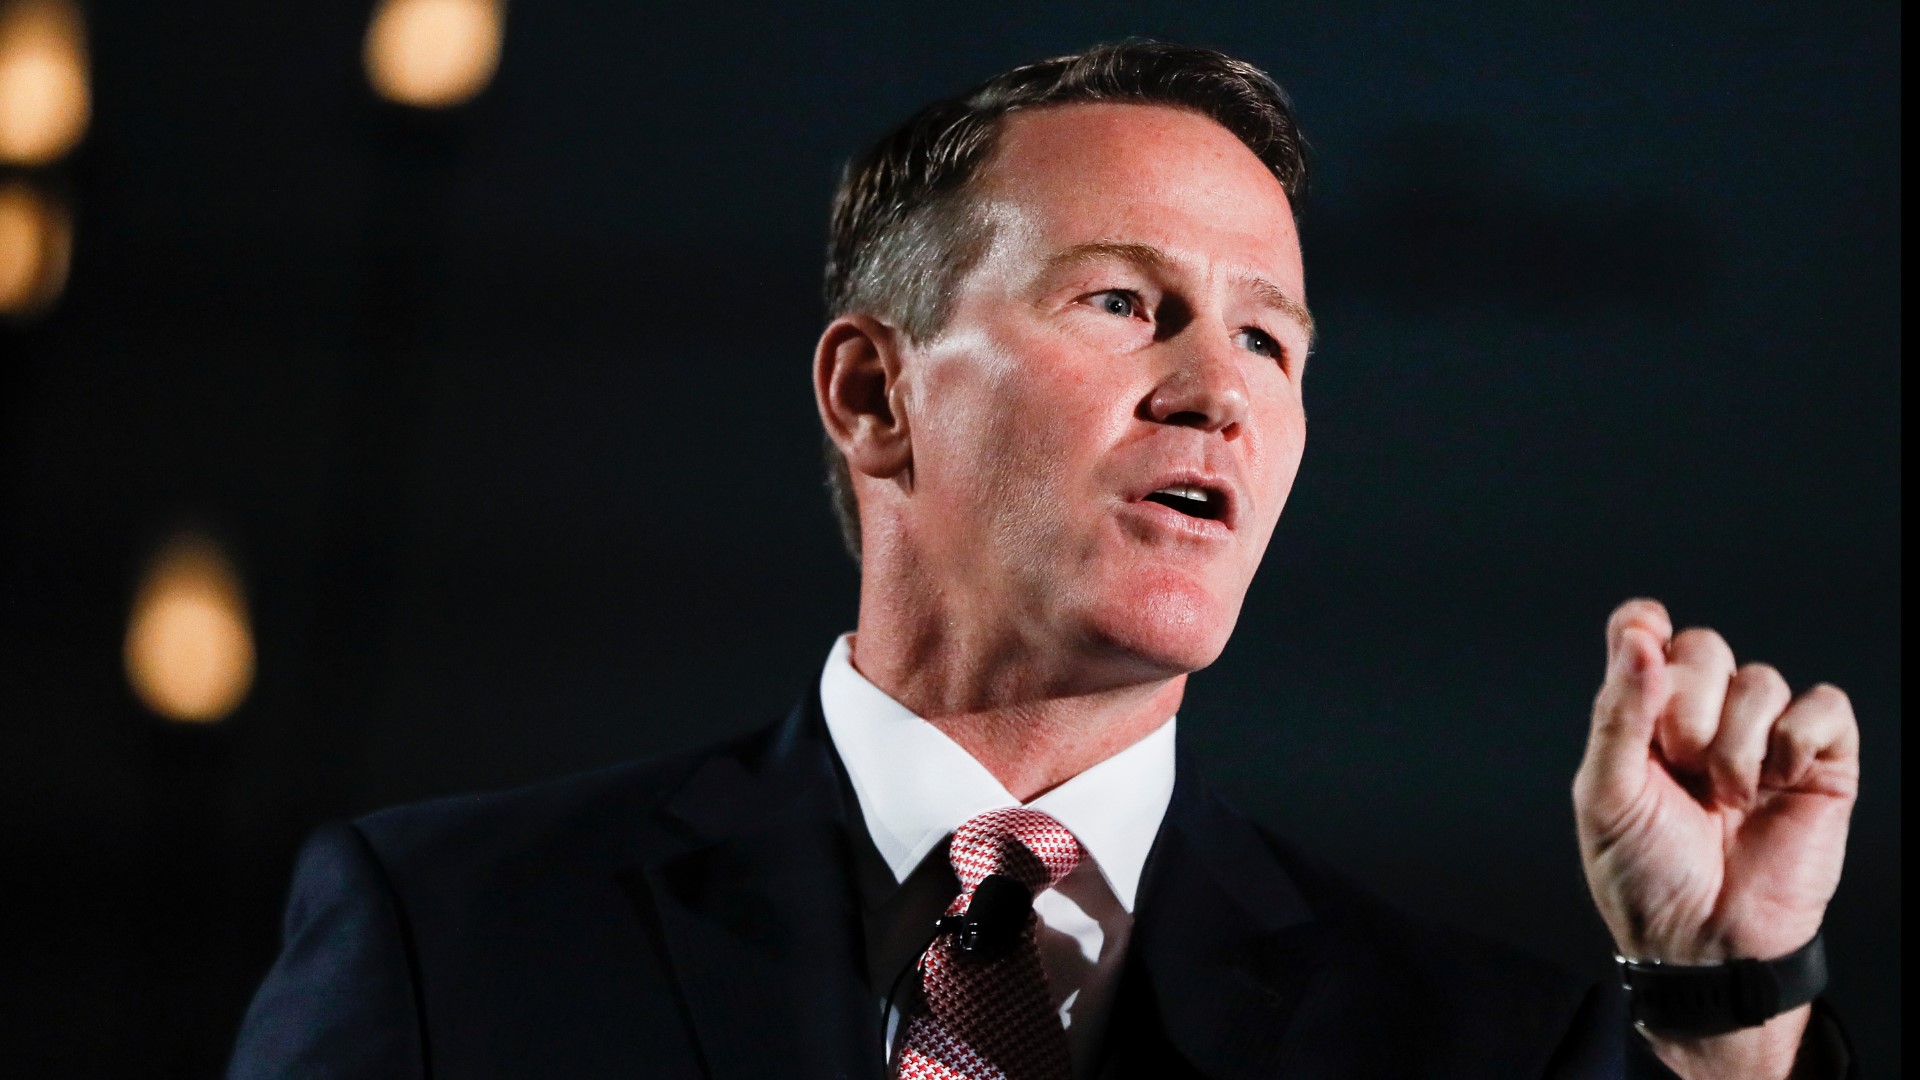 Lt. Gov. Jon Husted has been criticized after referring to COVID-19 as the "Wuhan virus" in a tweet last week while sharing an article about a former CDC director.